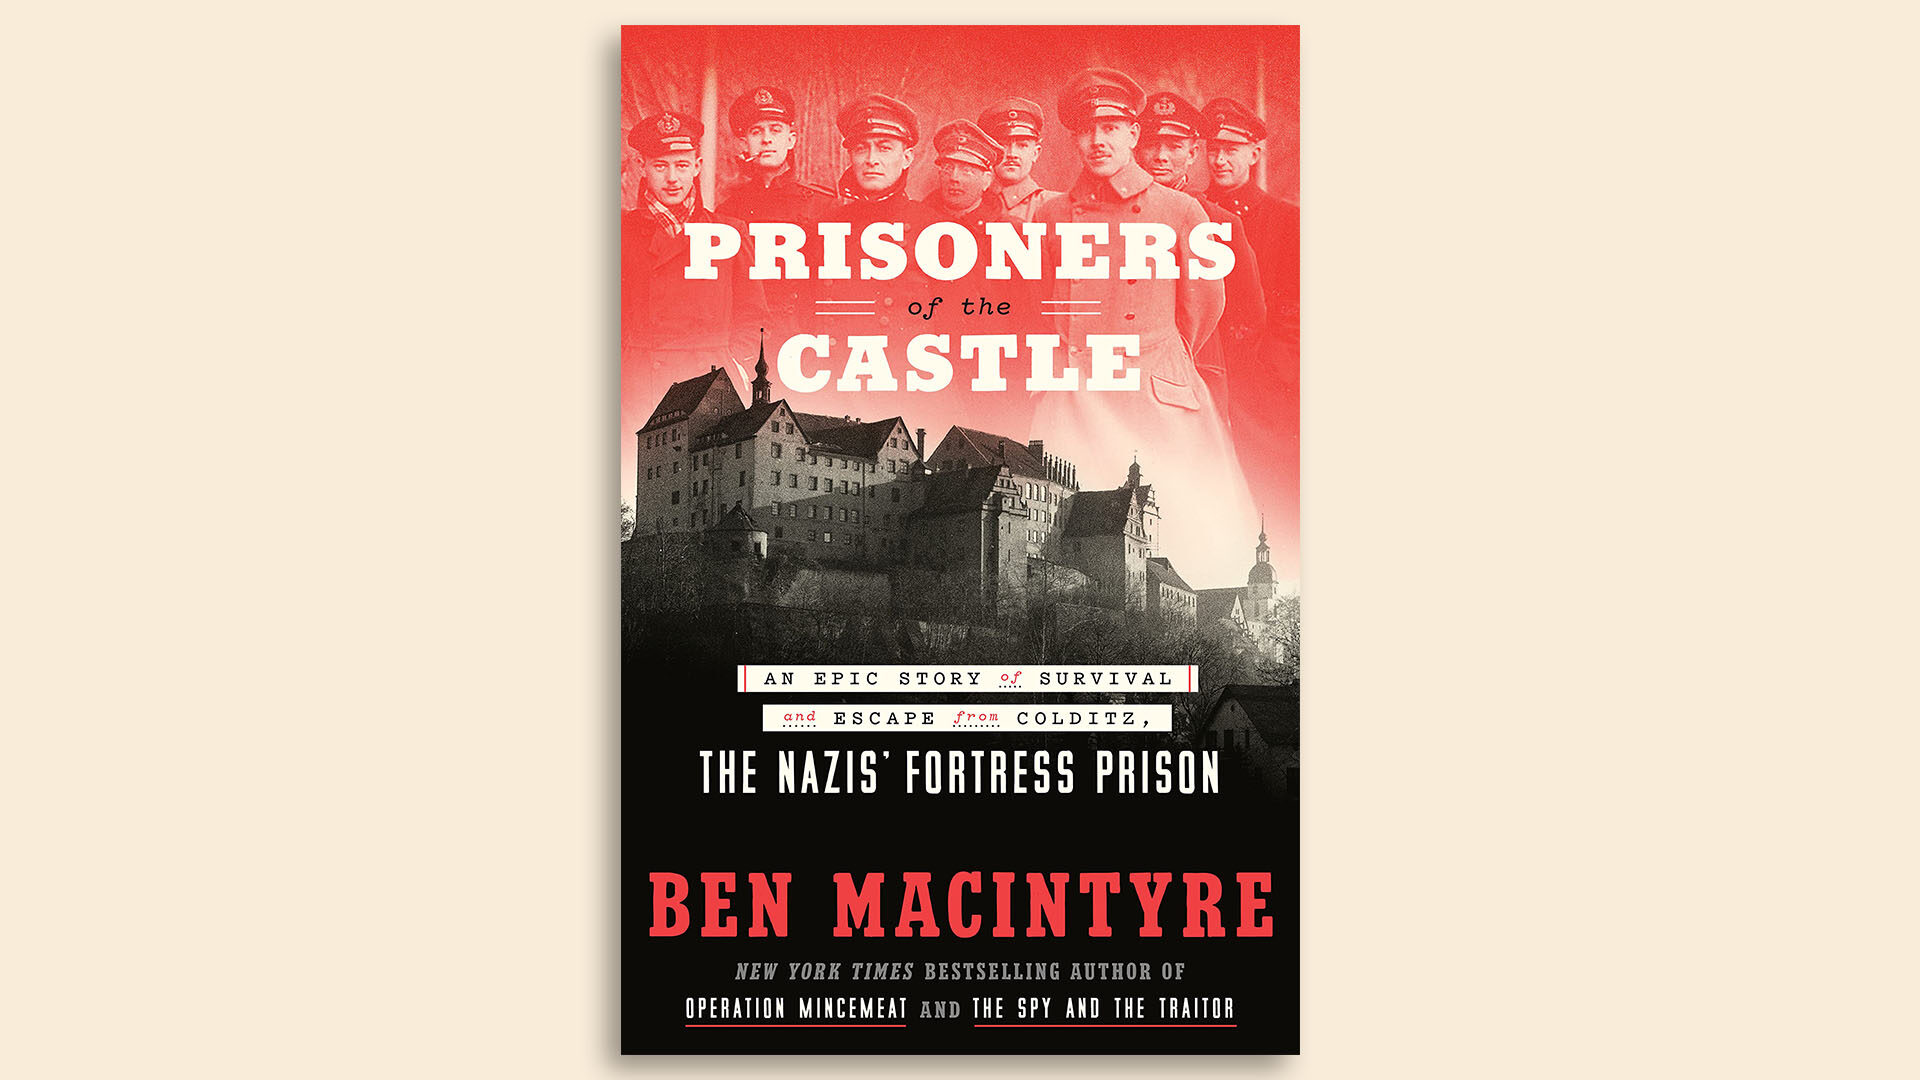 September Pick of the Month: “Prisoners of the Castle” by Ben